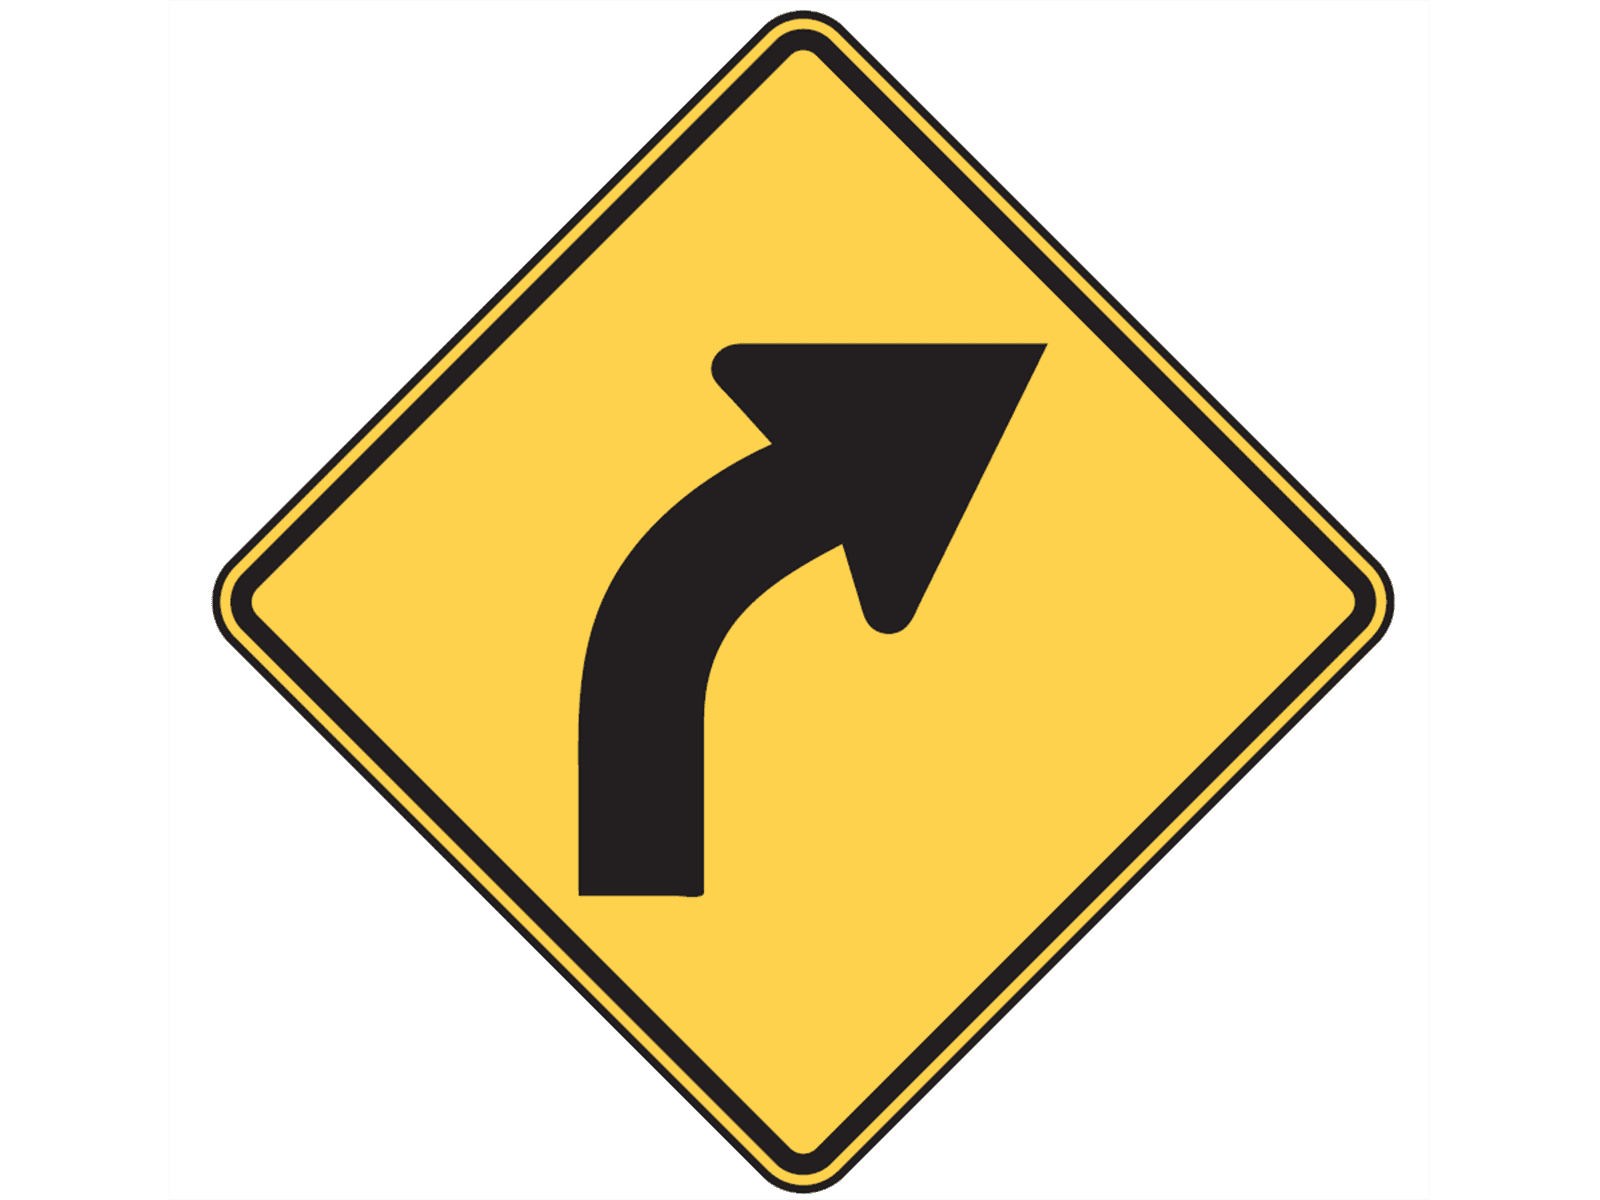 Right Curve W1-2L - W1: Curves and Turns